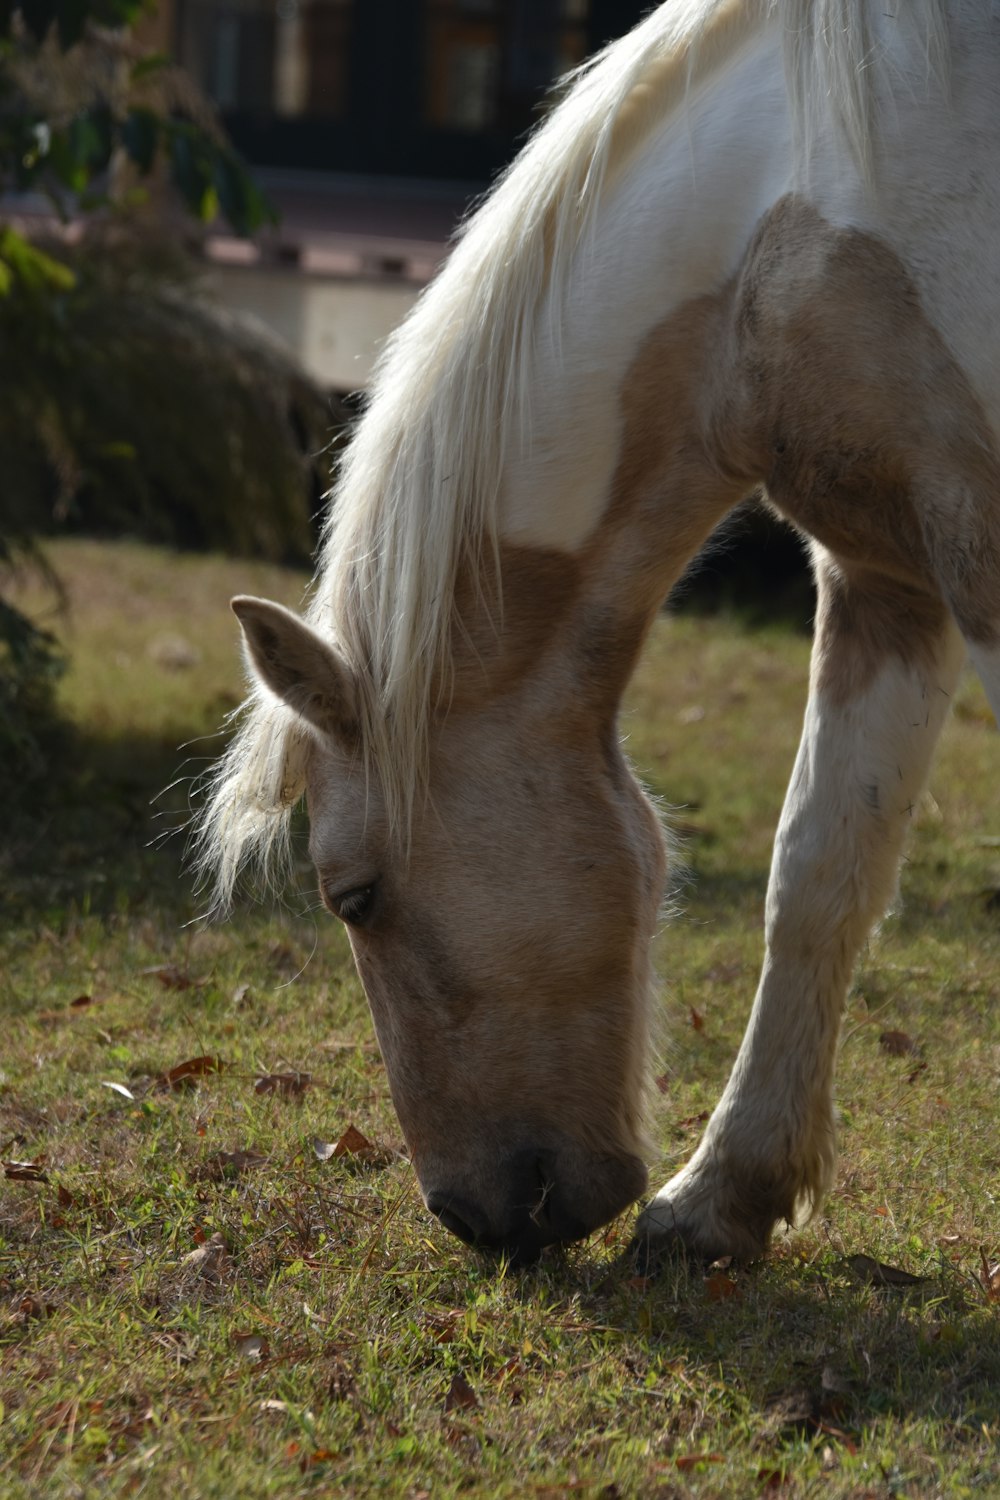 a brown and white horse eating grass in a field